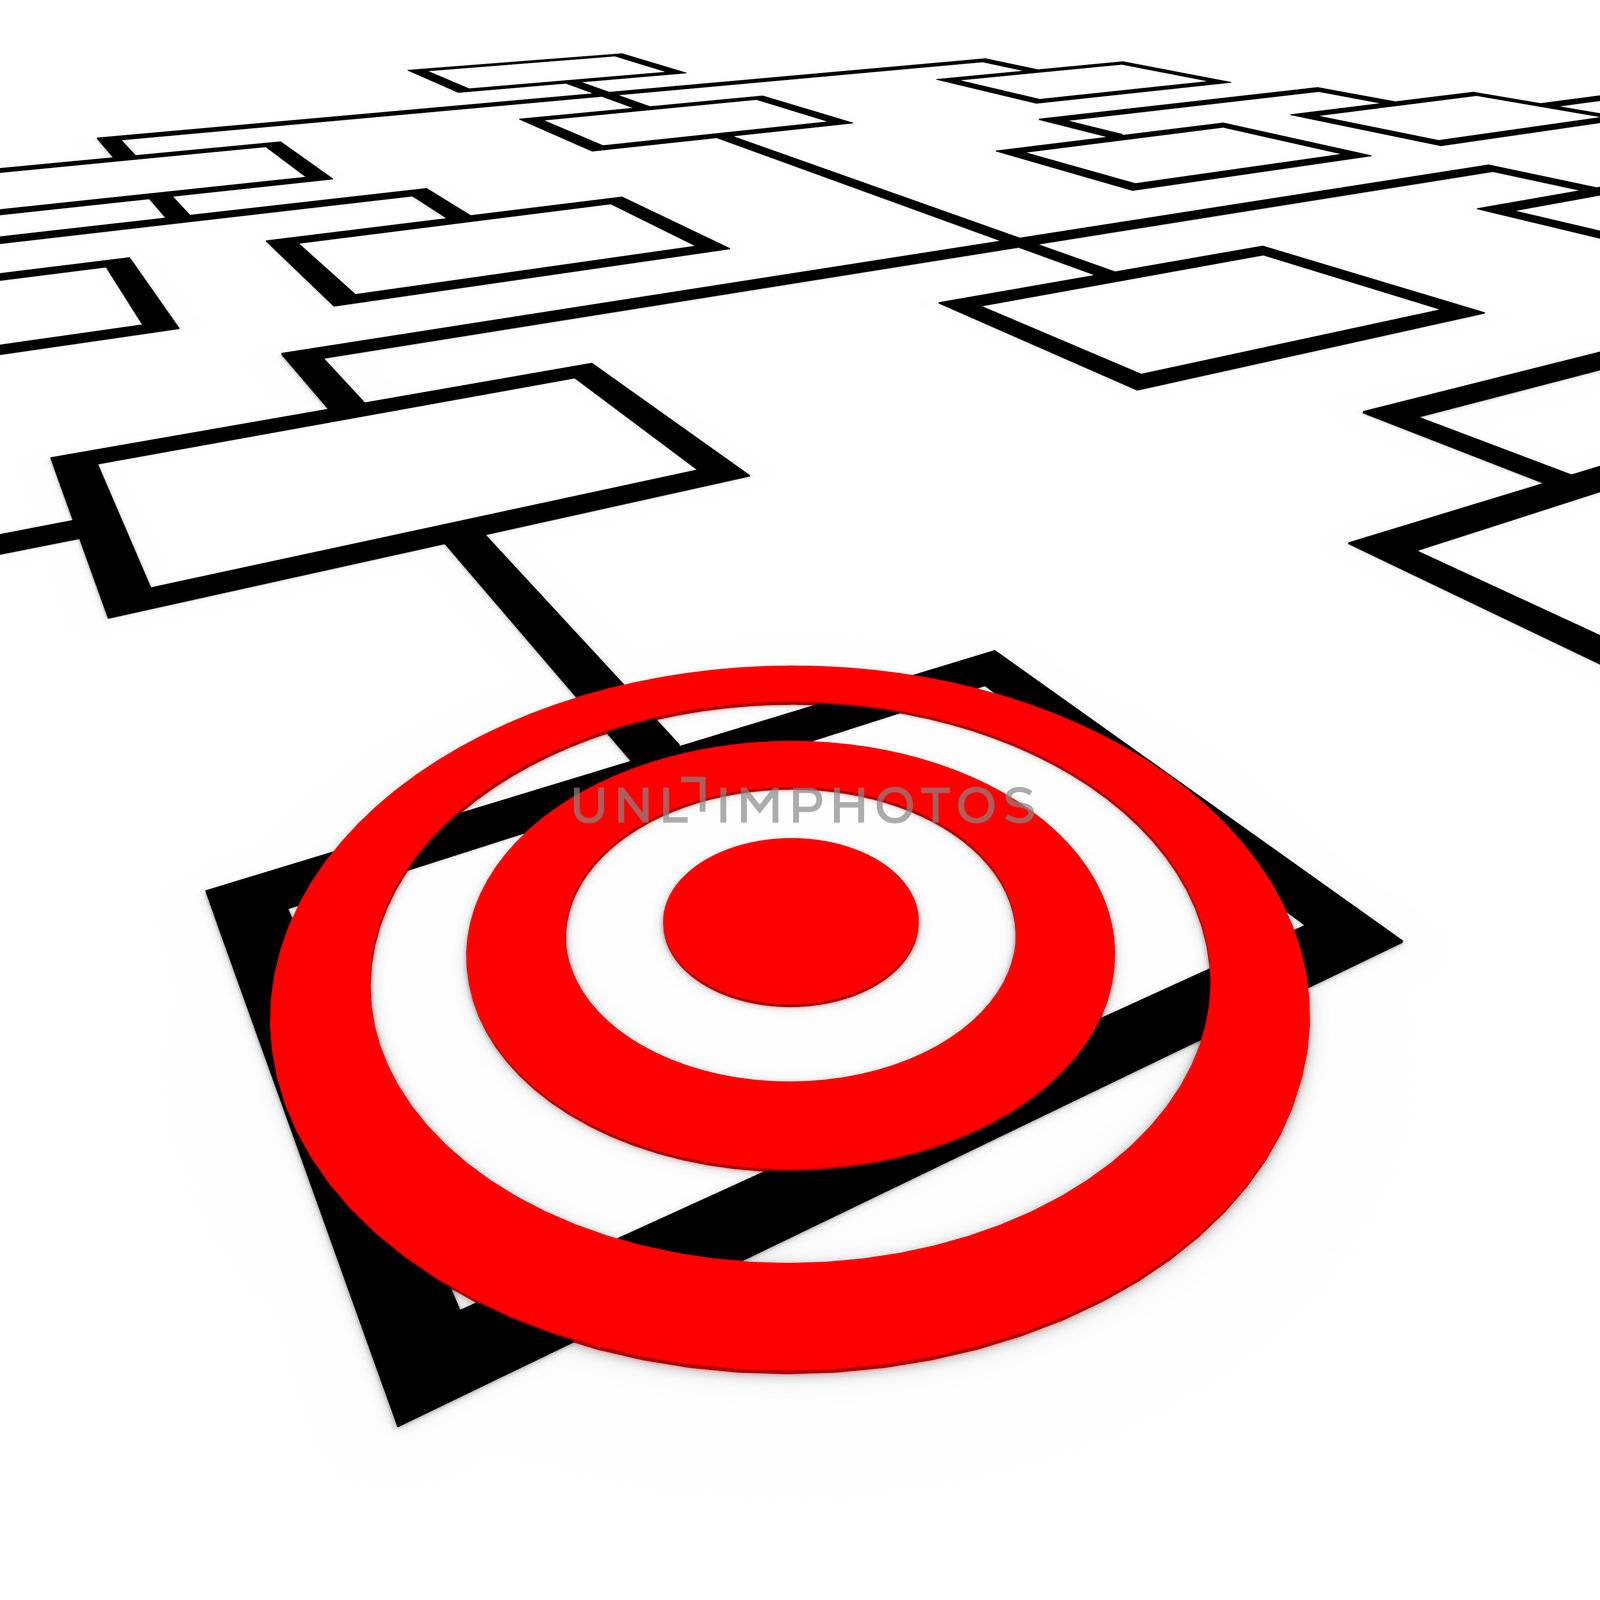 A bulls-eye target on a box in an organization org chart diagram, representing one position or employee being targeted or watched for promotion or elimination